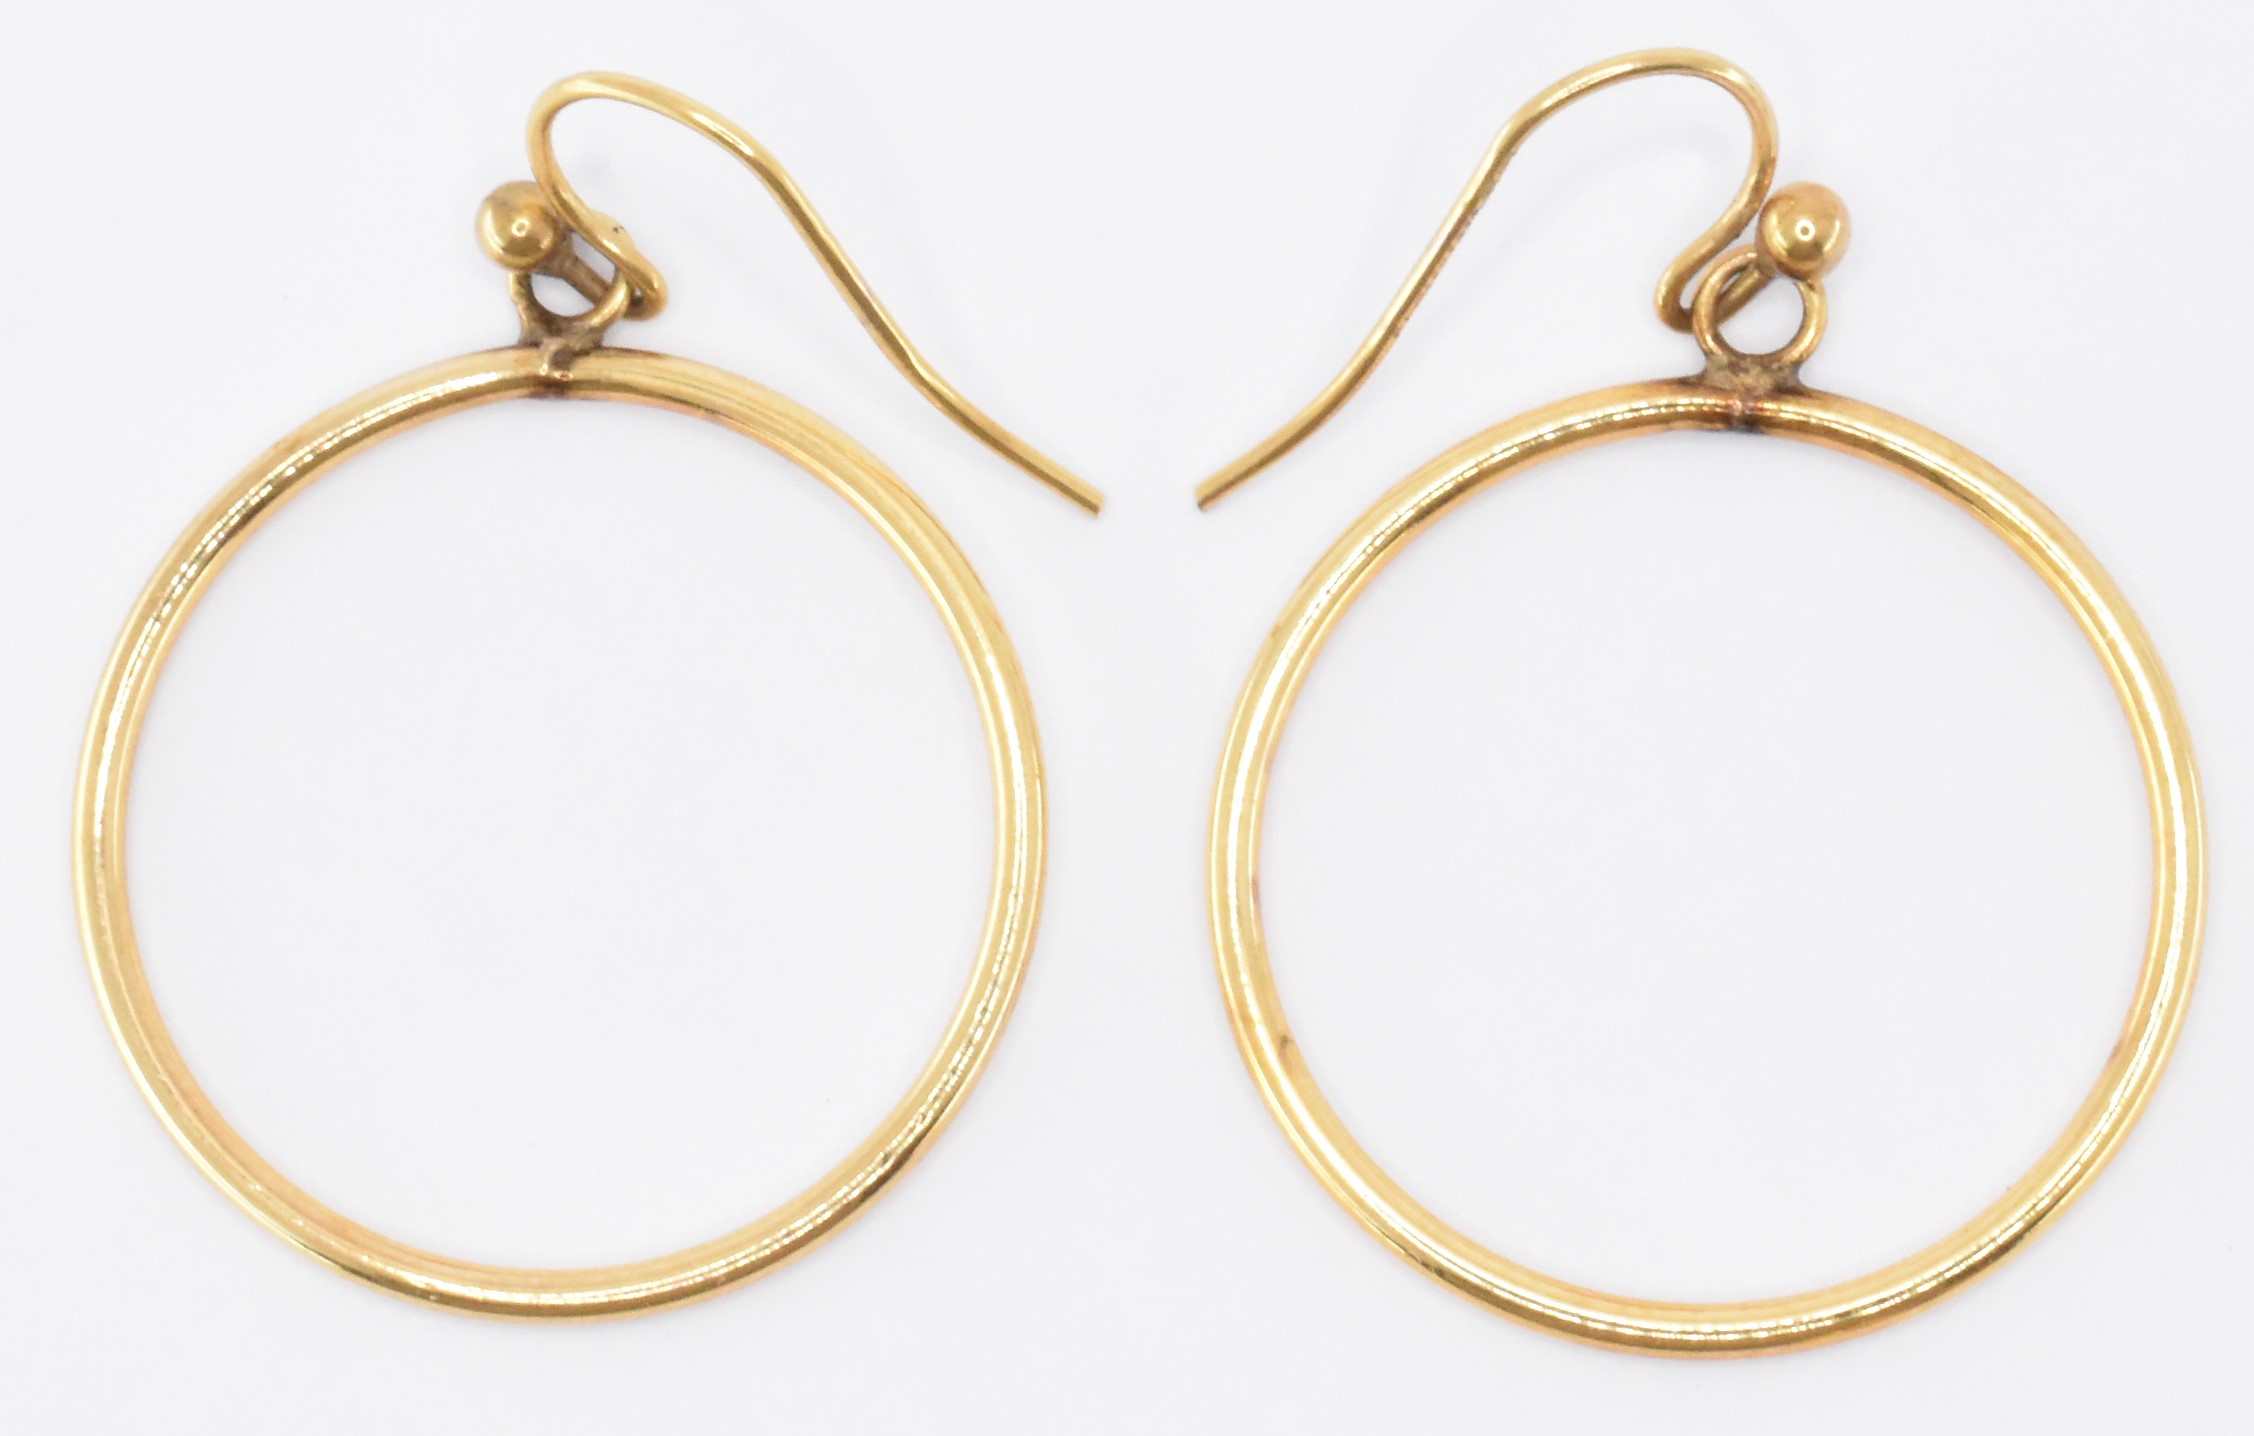 FOUR PAIRS OF 9CT GOLD EARRINGS - Image 2 of 5